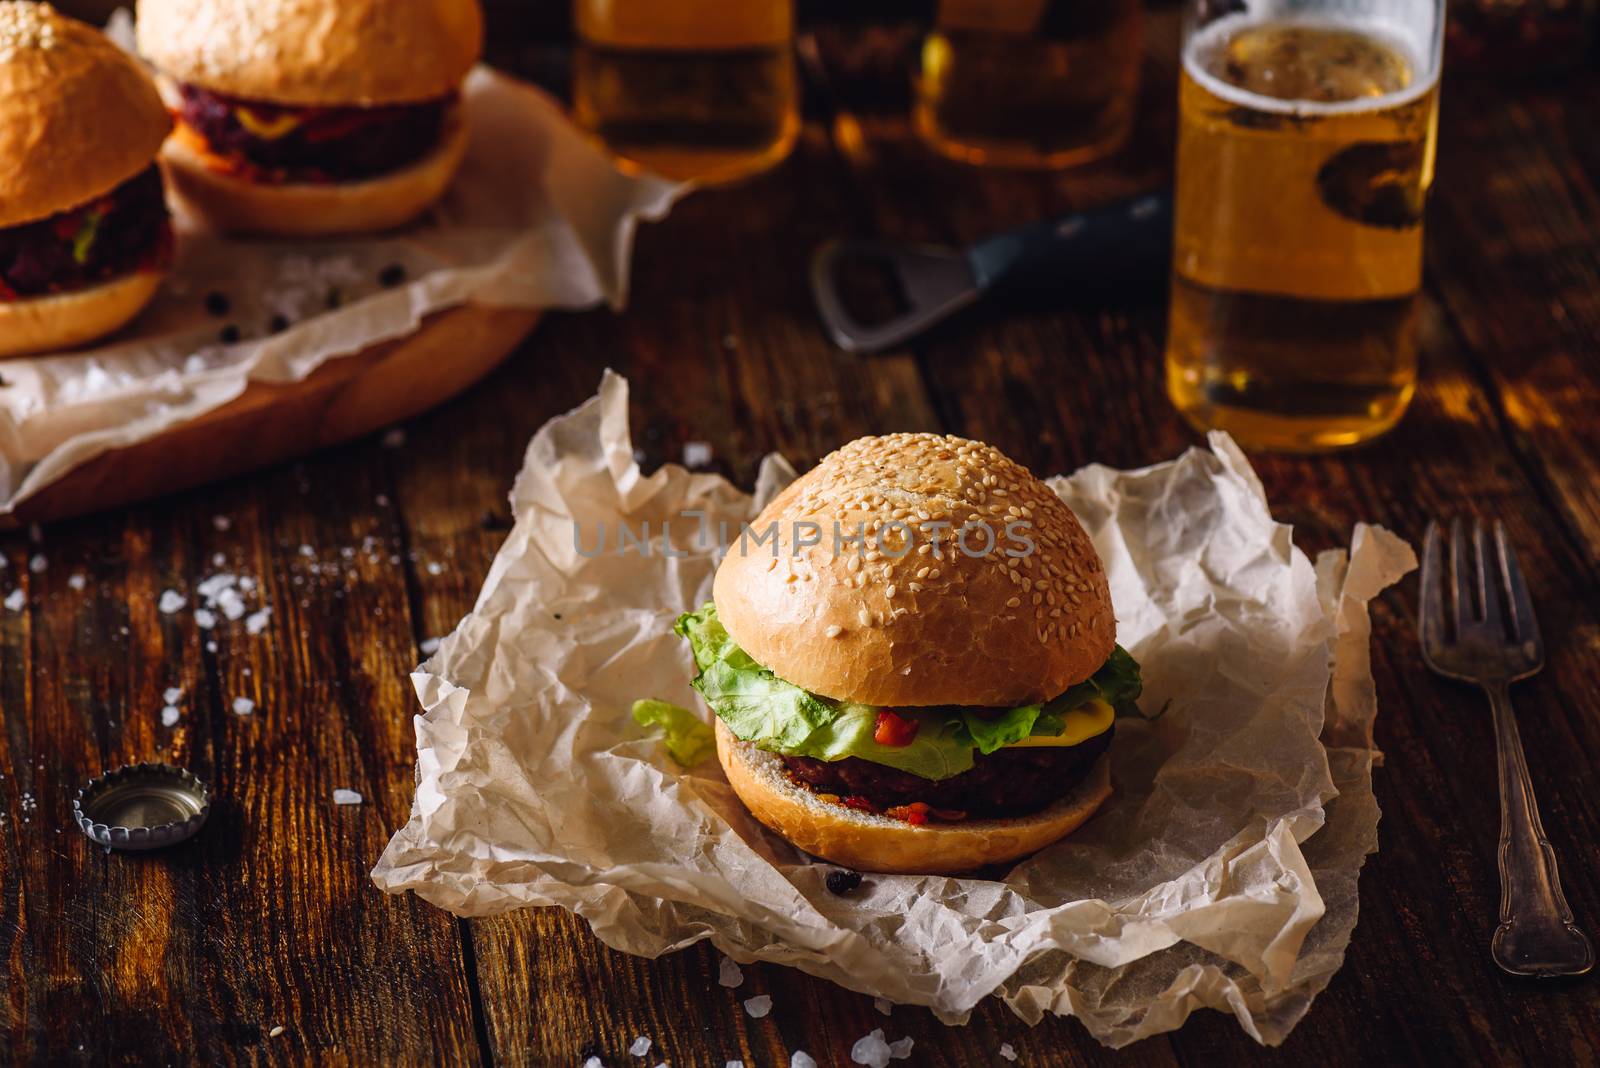 Homemade Burger on Paper with Beer Bottle.